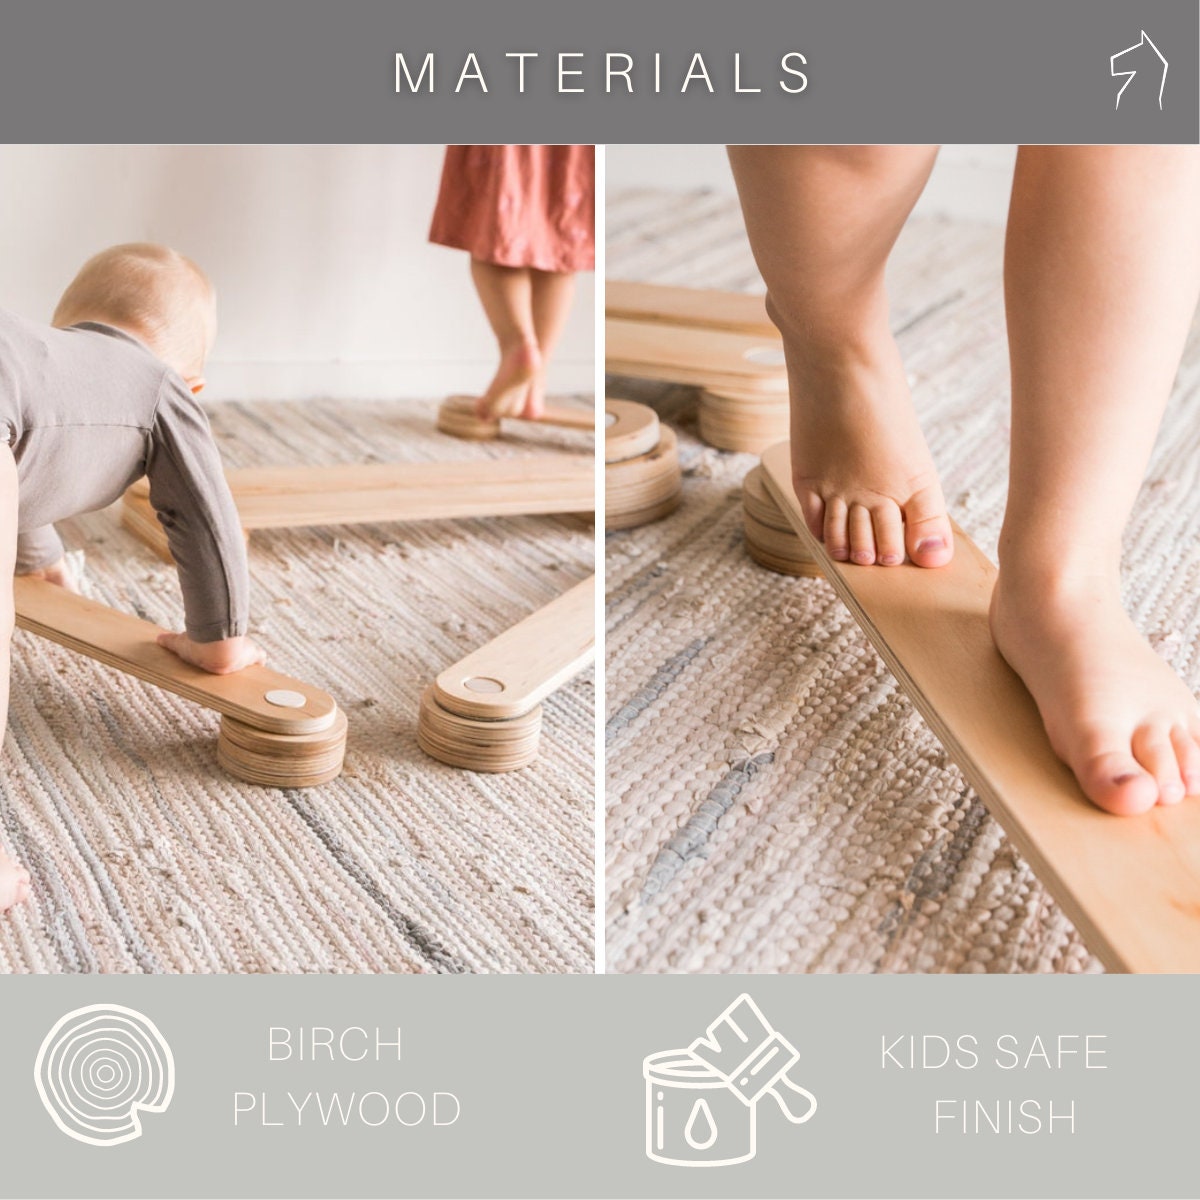 Two photos of children playing on wooden balance beam with text describing materials and finish